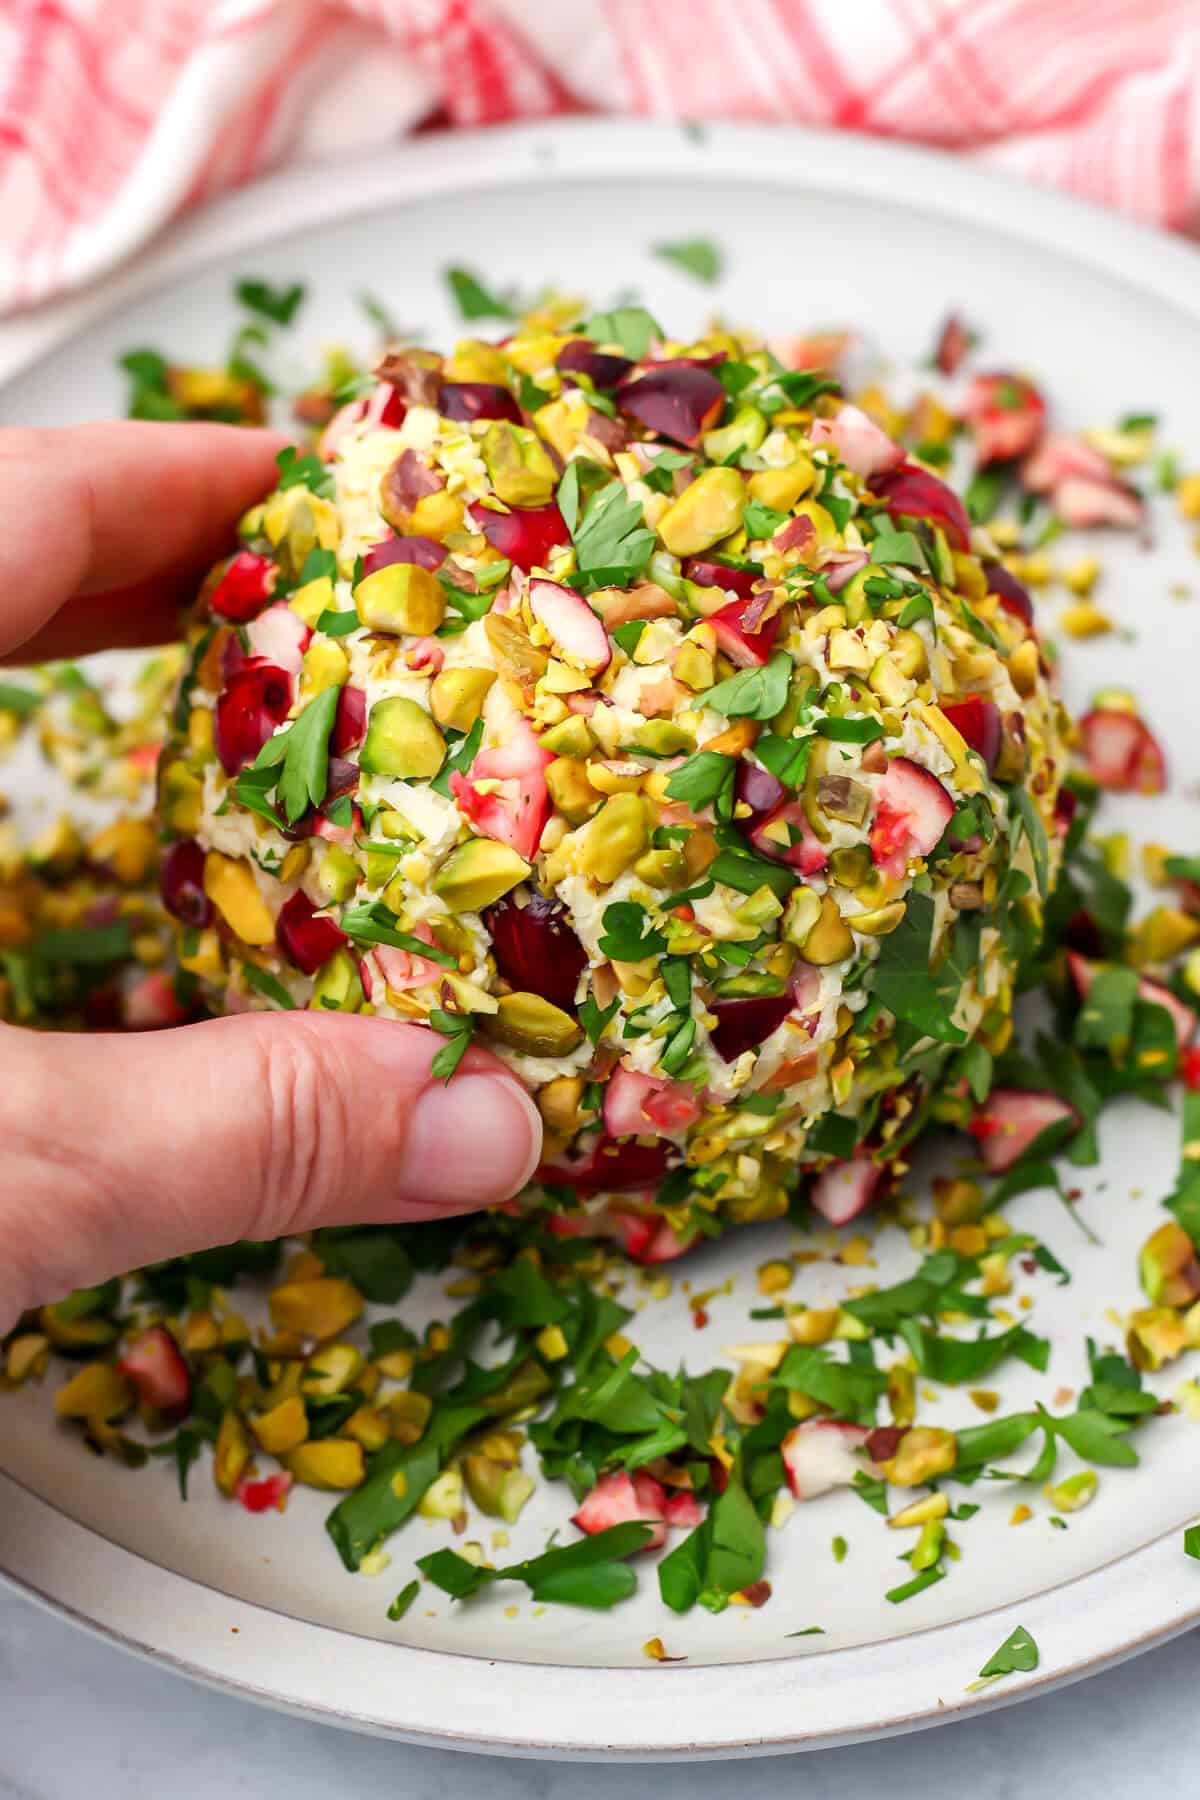 Rolling a vegan cheese ball made from tofu in chopped nuts, herbs, and cranberries.